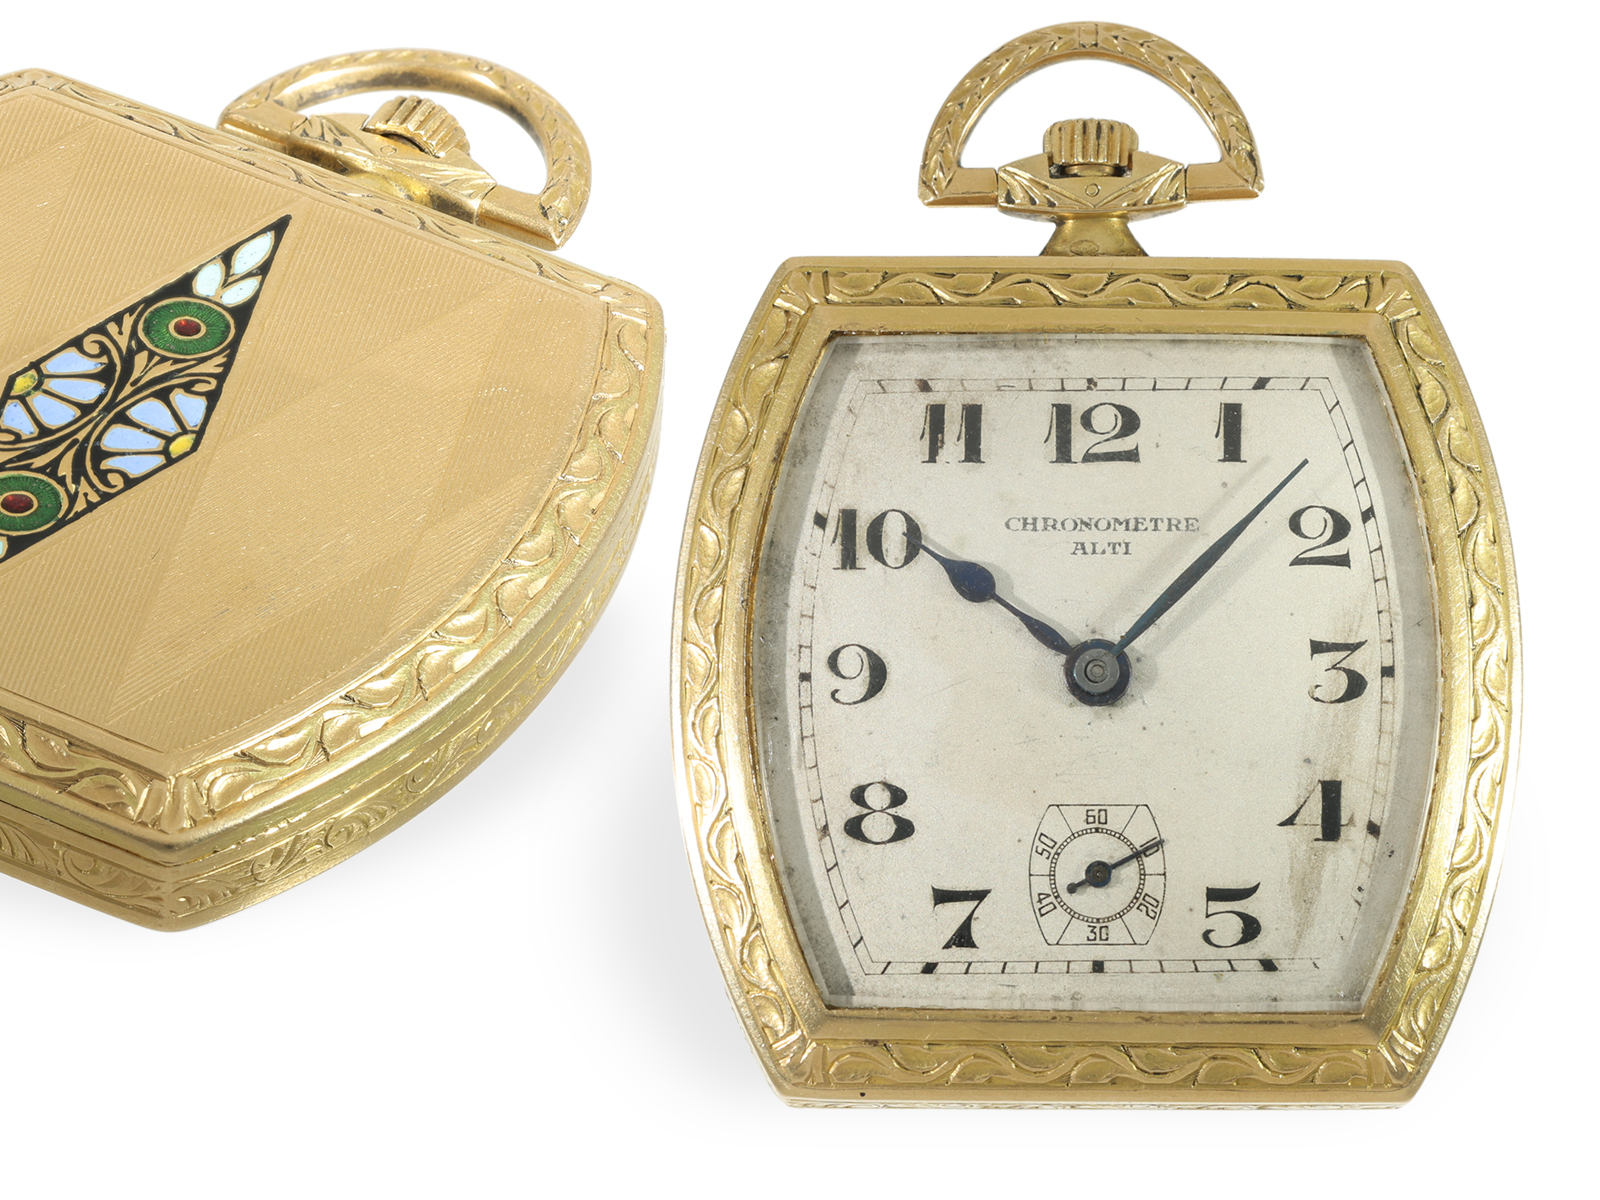 Pocket watch: extremely rare Art Deco gold/enamel dress watch in chronometer quality, ca. 1925